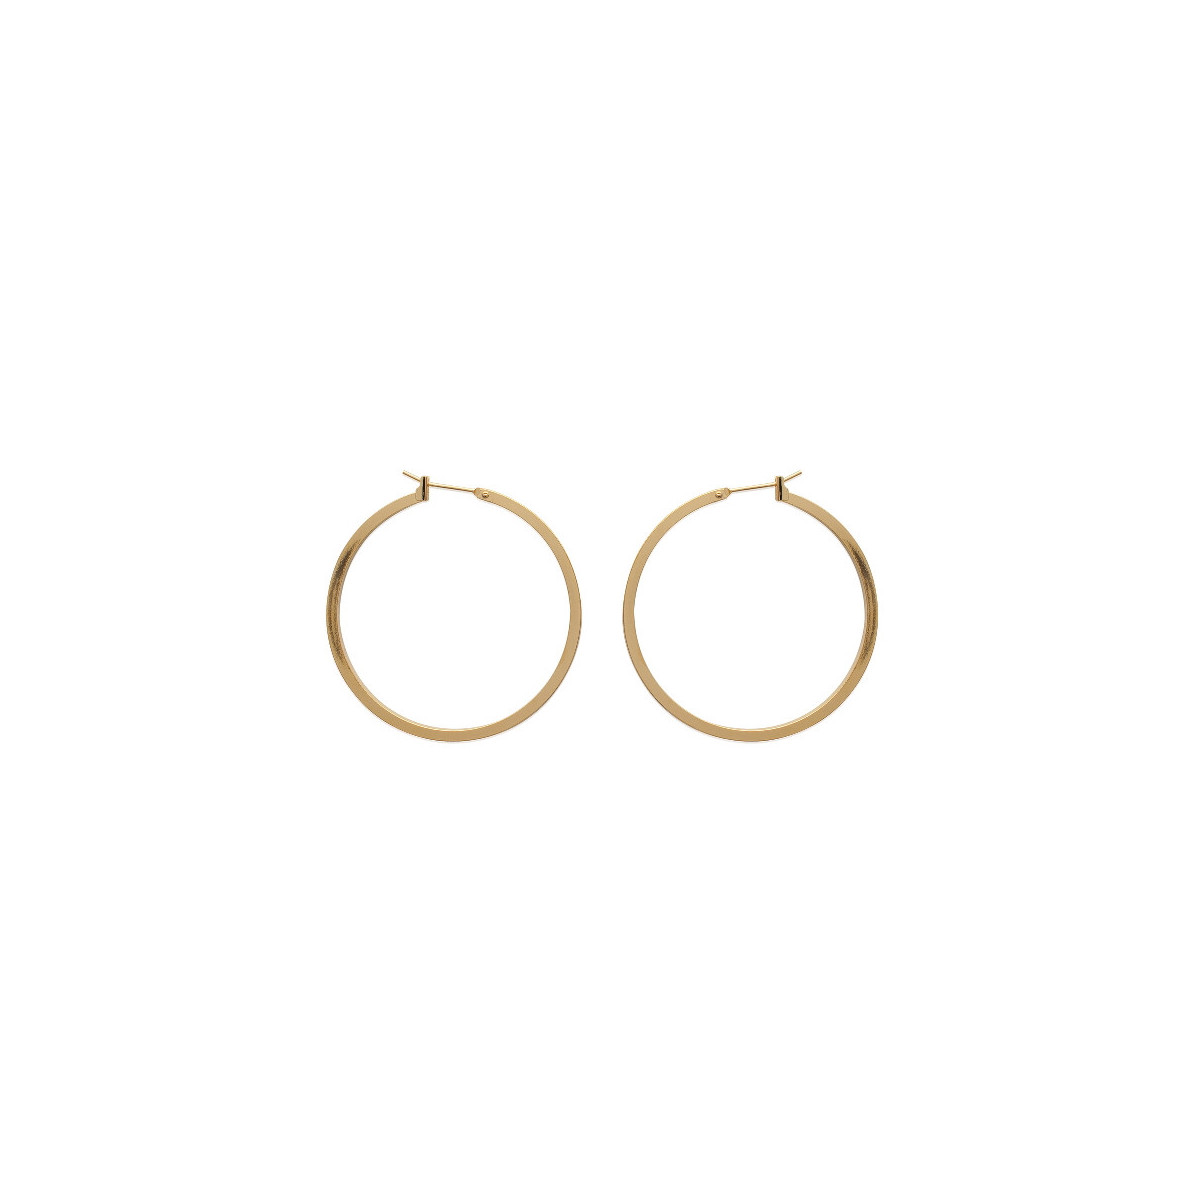 ROSE GOLD PLATED SILVER HOOPS 45MM